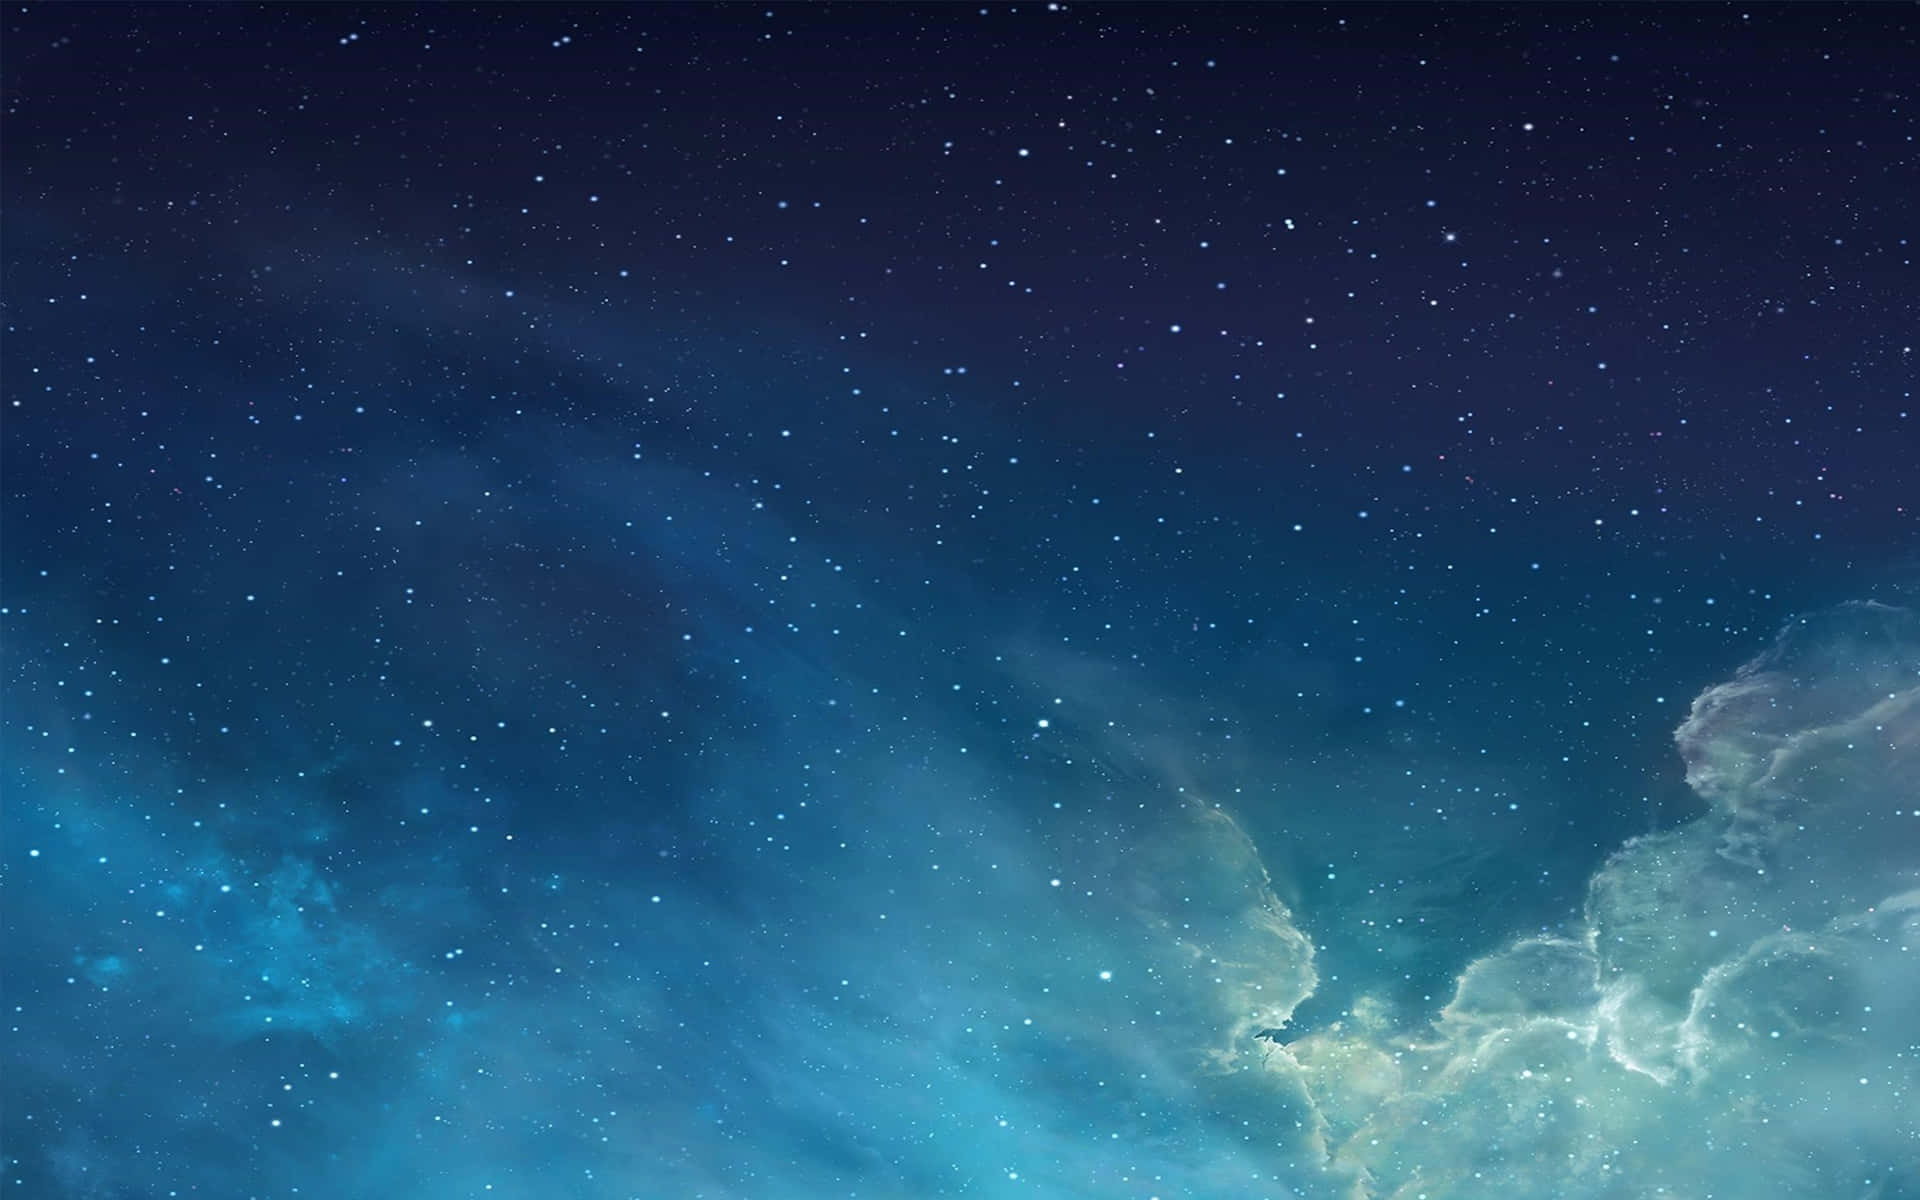 Explore the Intersections of Green and Blue in This Heavenly Galaxy Wallpaper